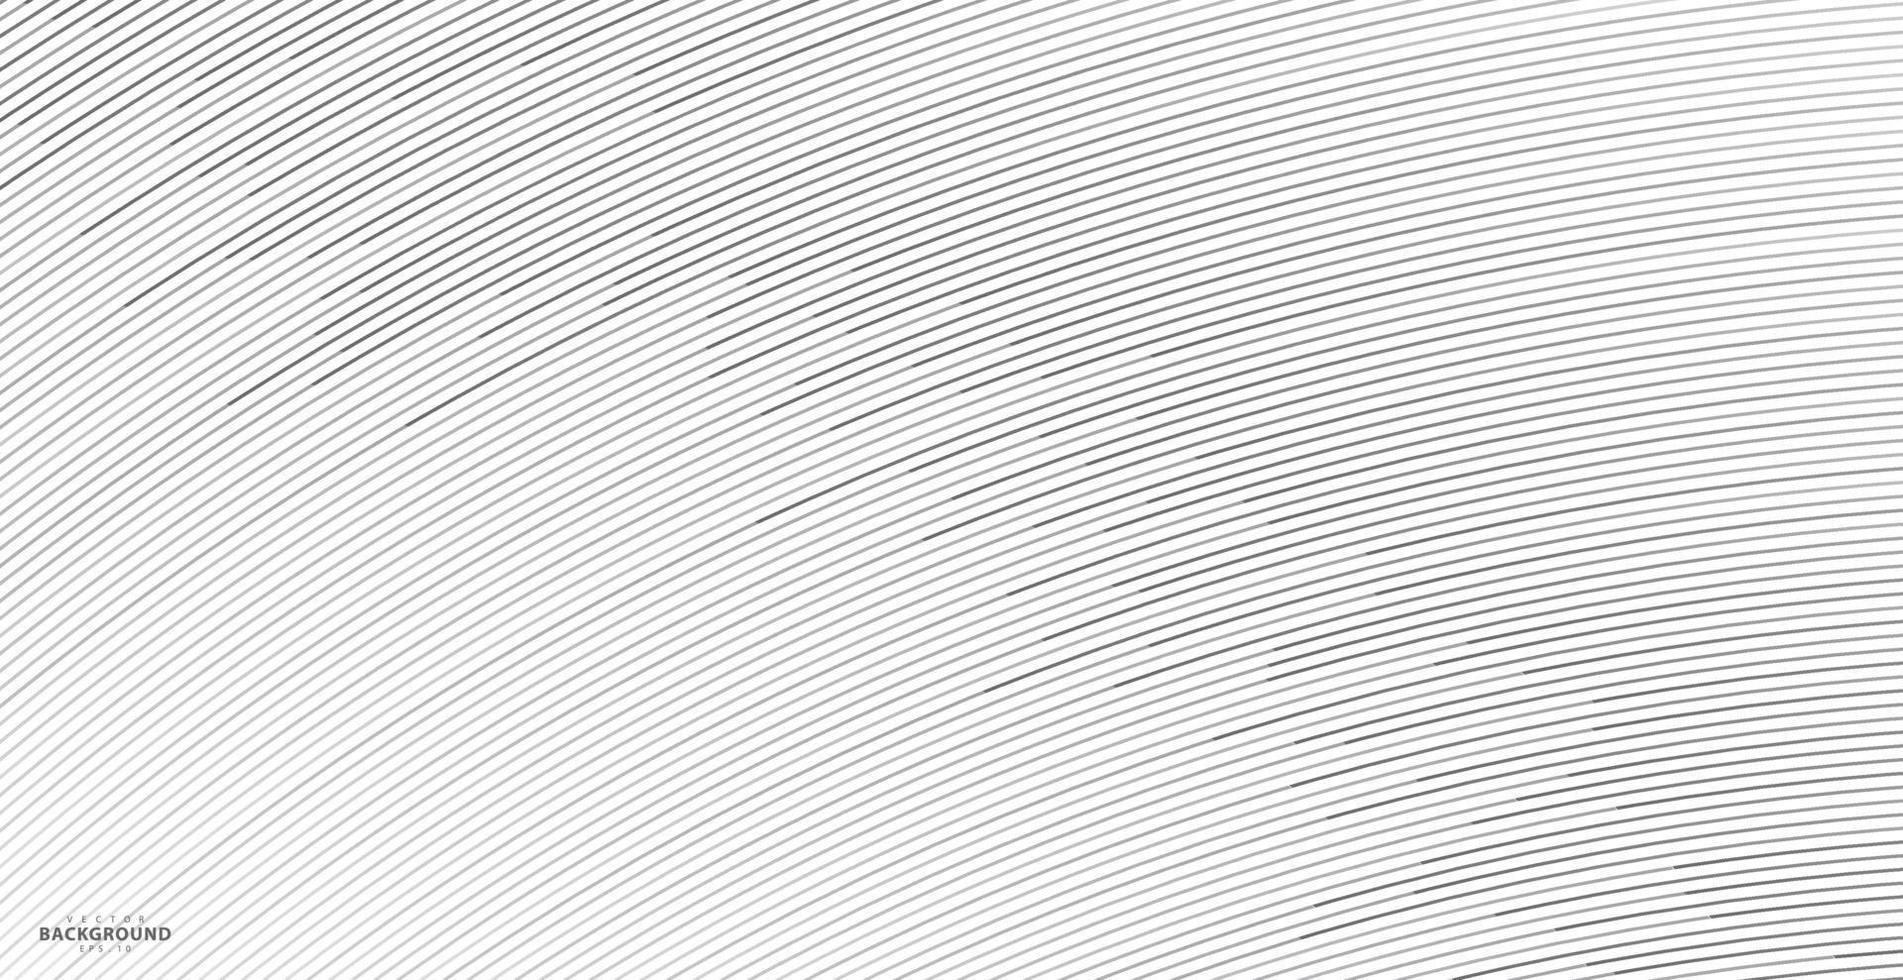 Abstract warped Diagonal Striped Background, wave lines texture. vector